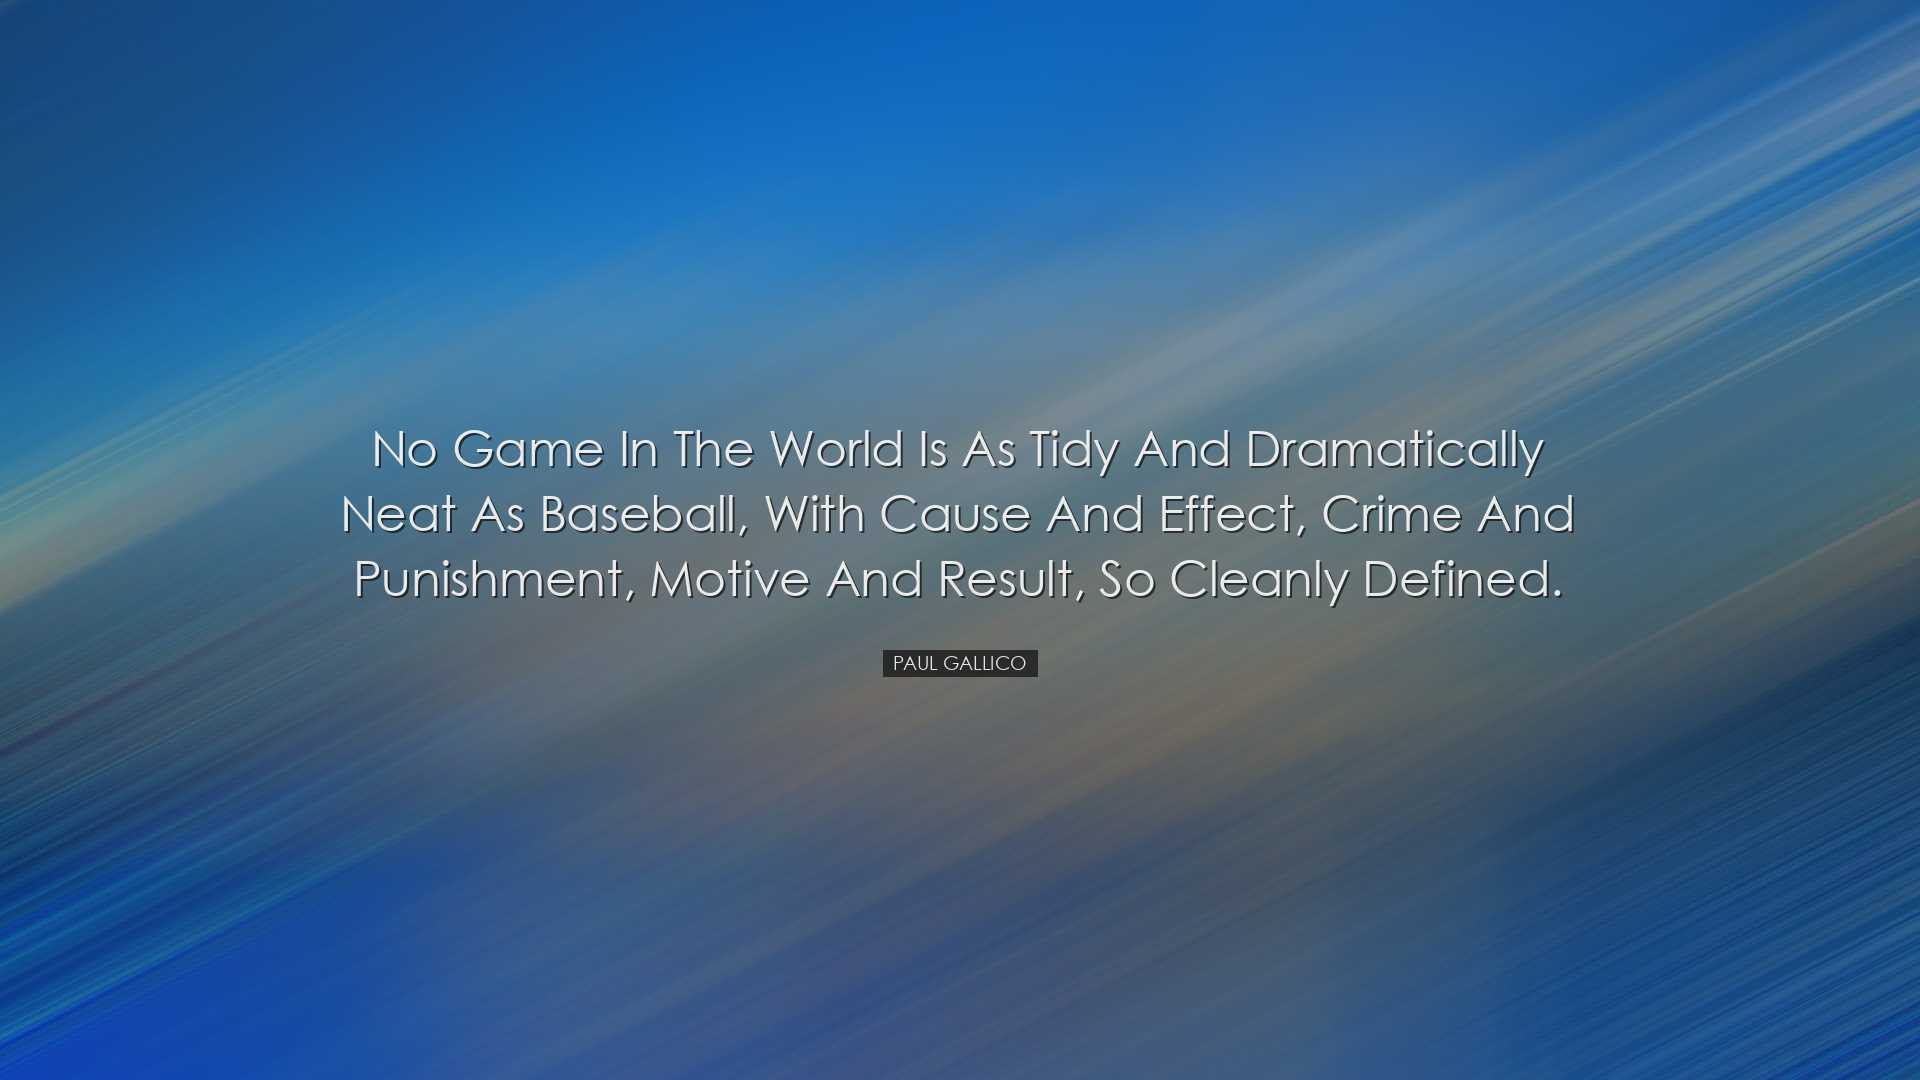 No game in the world is as tidy and dramatically neat as baseball,